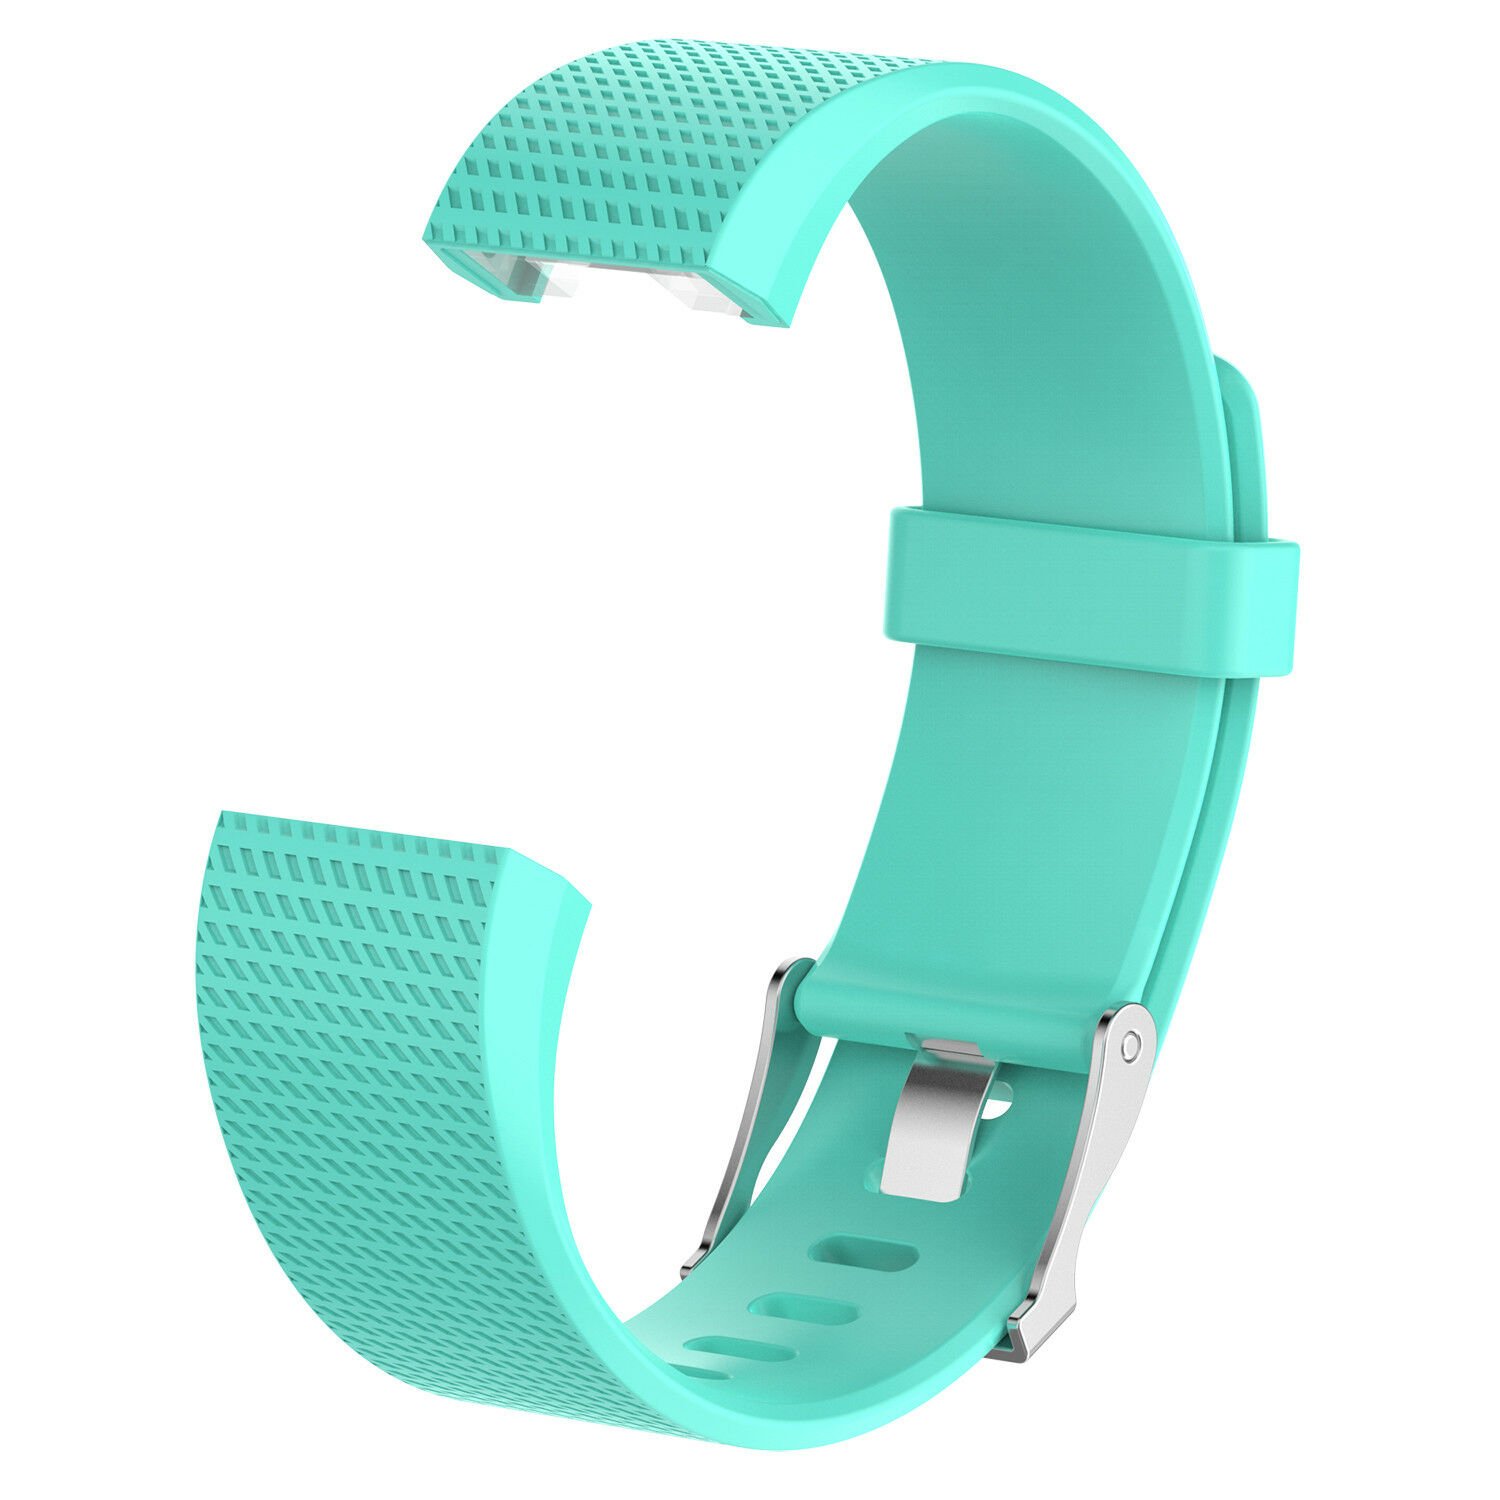 Fitbit Charge 2 Replacement Wrist Bands Smart Watch Bracelet Band | eBay